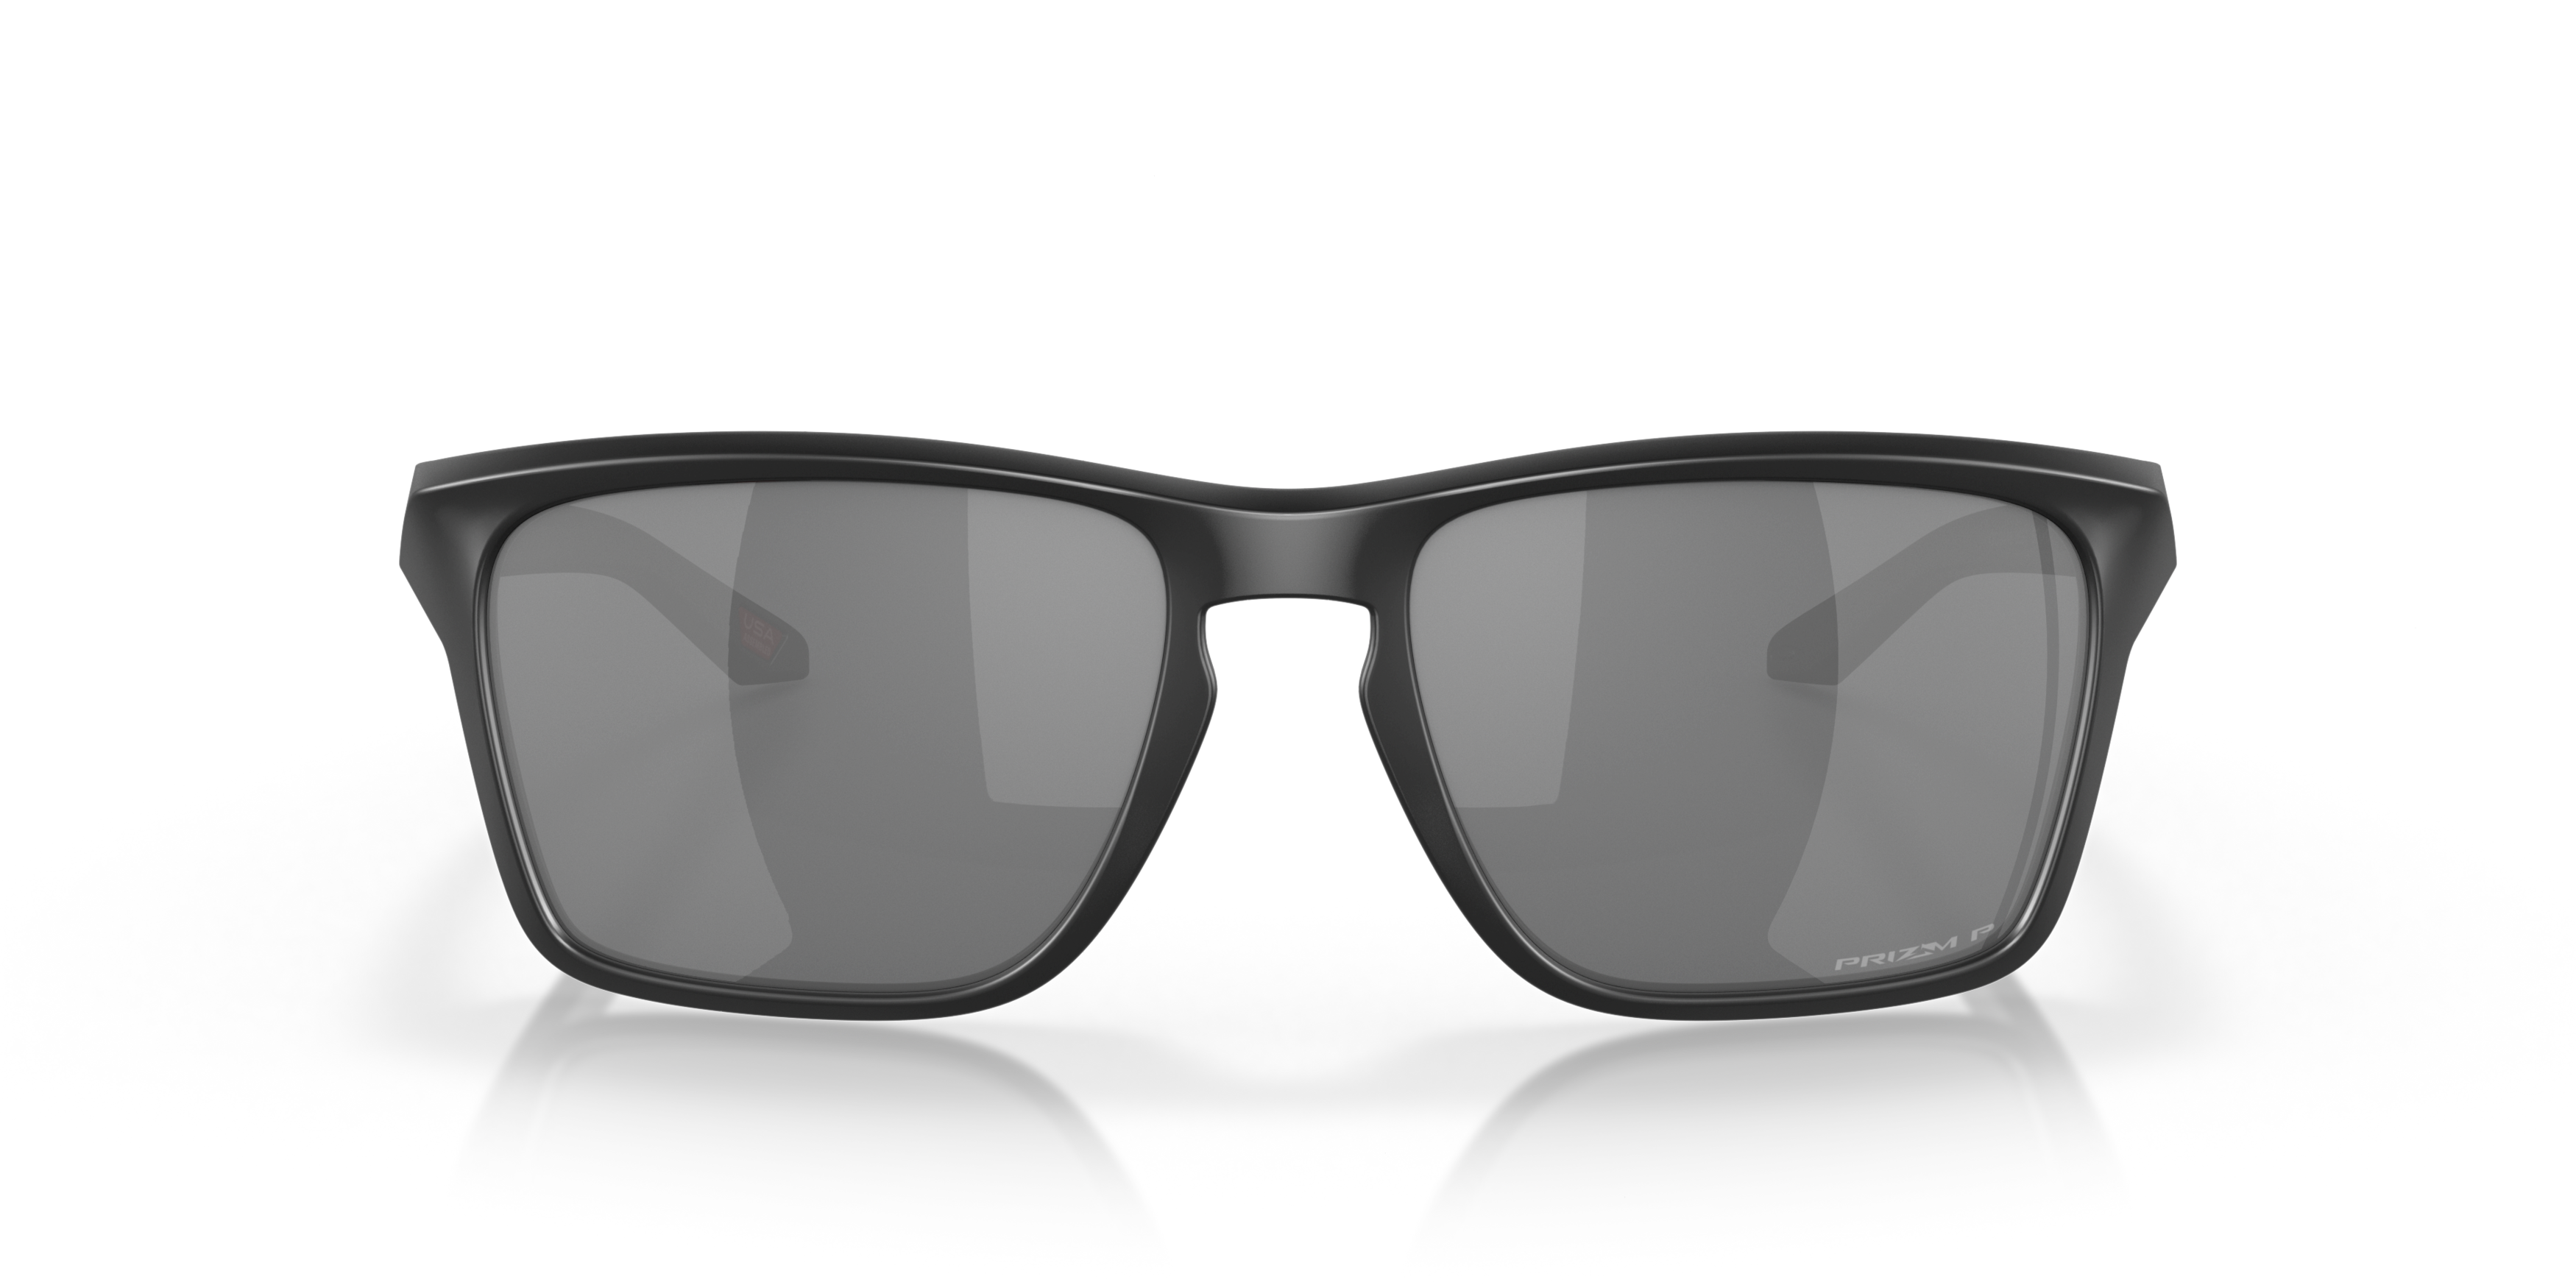 [products.image.front] Oakley OO9448 944806